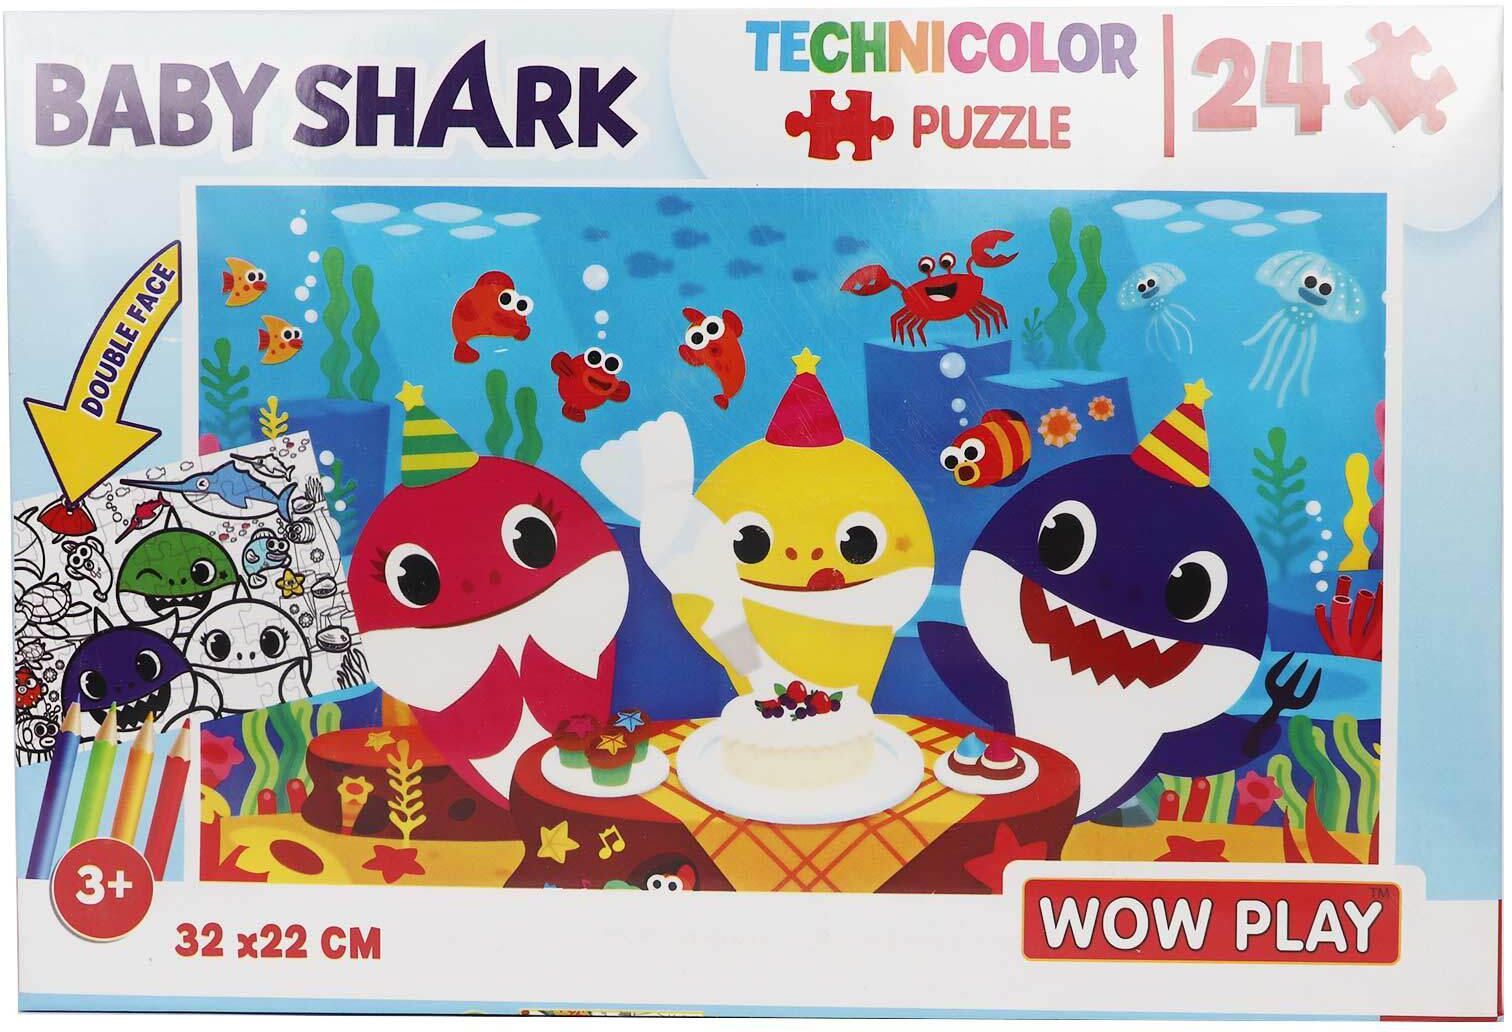 Wow Play Puzzle - 24 Piece